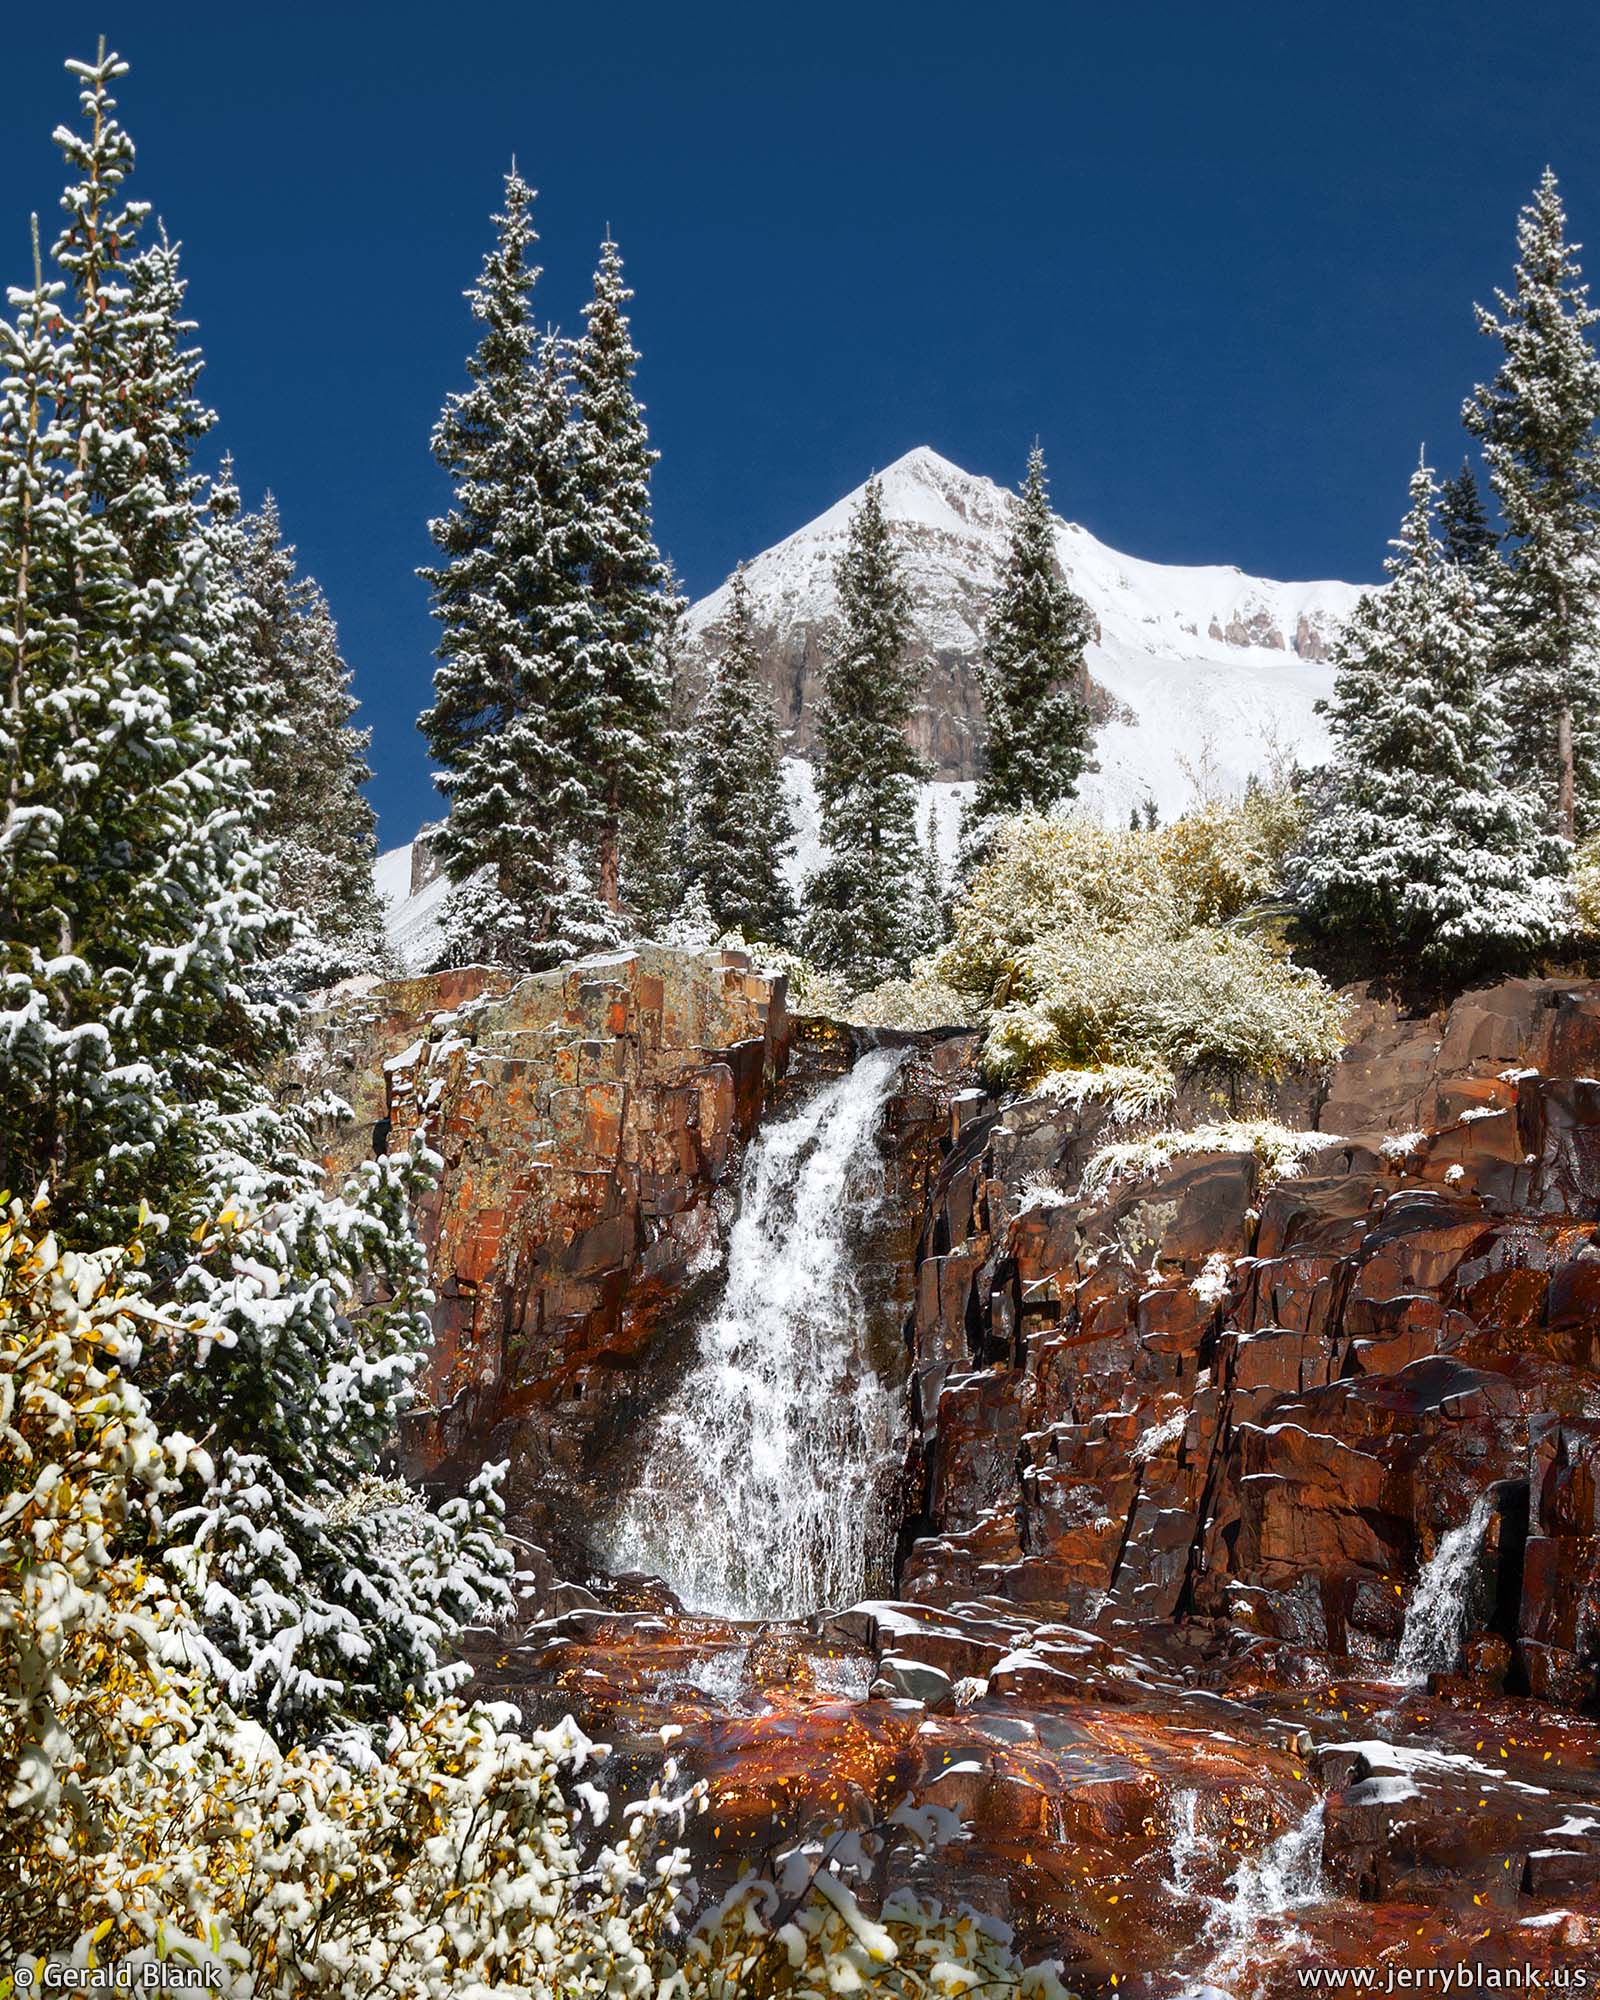 #06612 - Snow covers autumn foliage around a waterfall on Sneffels Creek, in Yankee Boy Basin in the Colorado landscape, with Cirque Mountain in the background